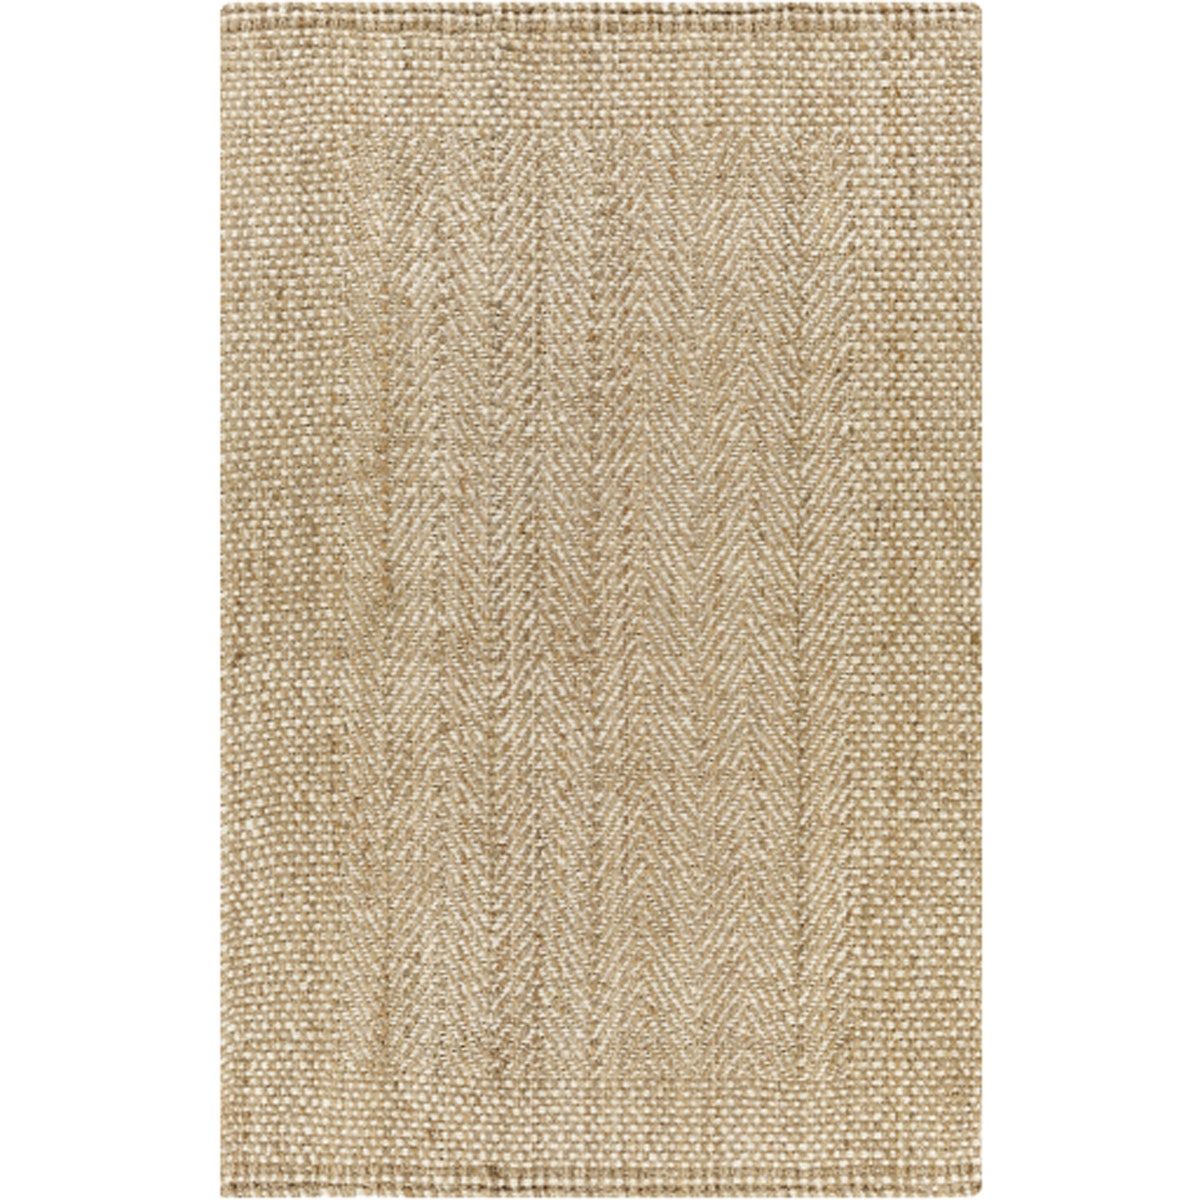 Picture of KERALA 2300 5'X7'6" RUG